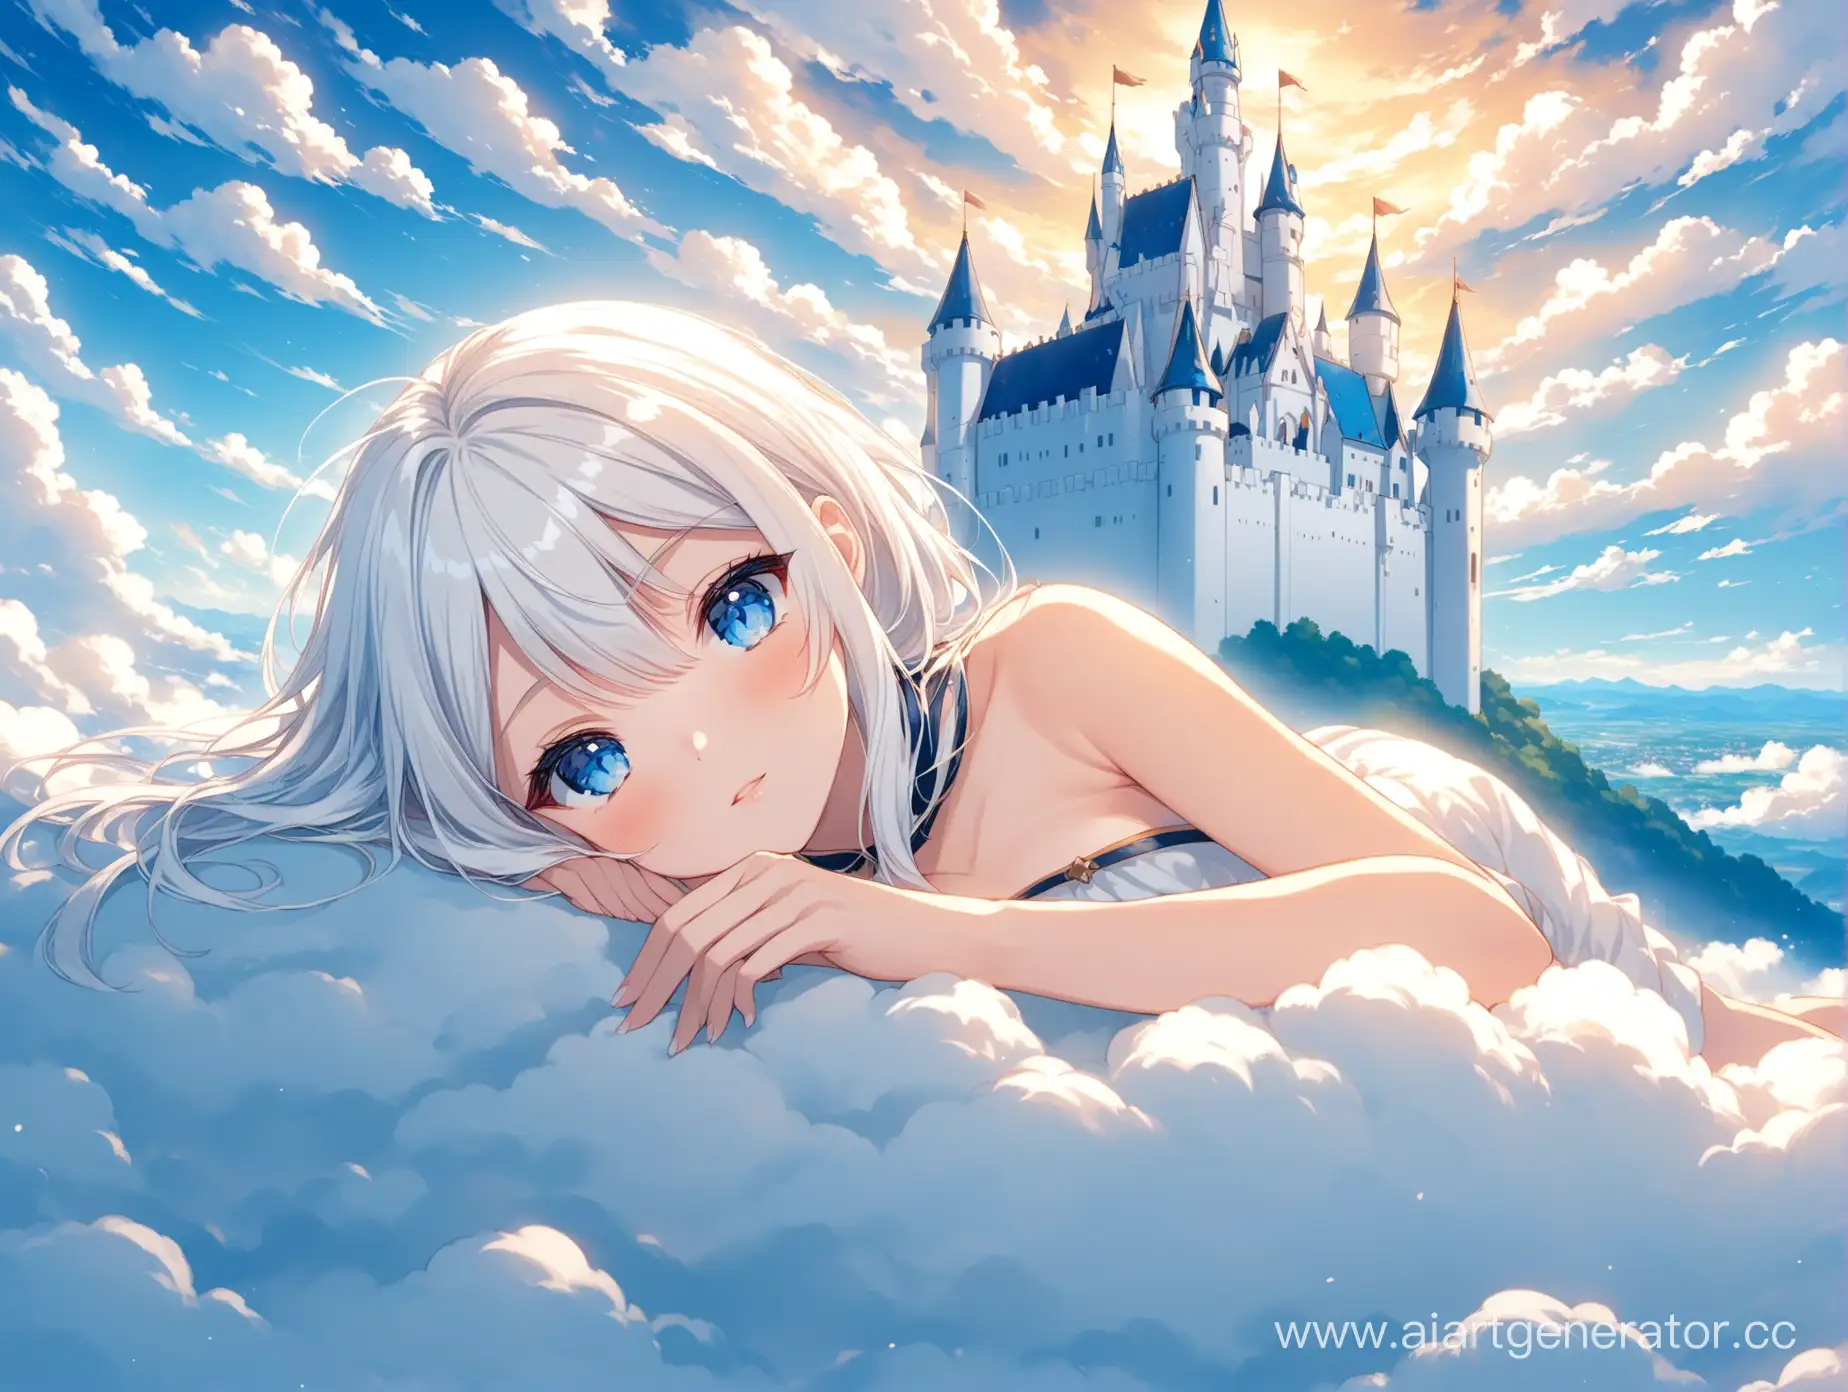 Serene-Anime-Girl-with-White-Hair-and-Blue-Eyes-Relaxing-in-a-Cloud-Castle